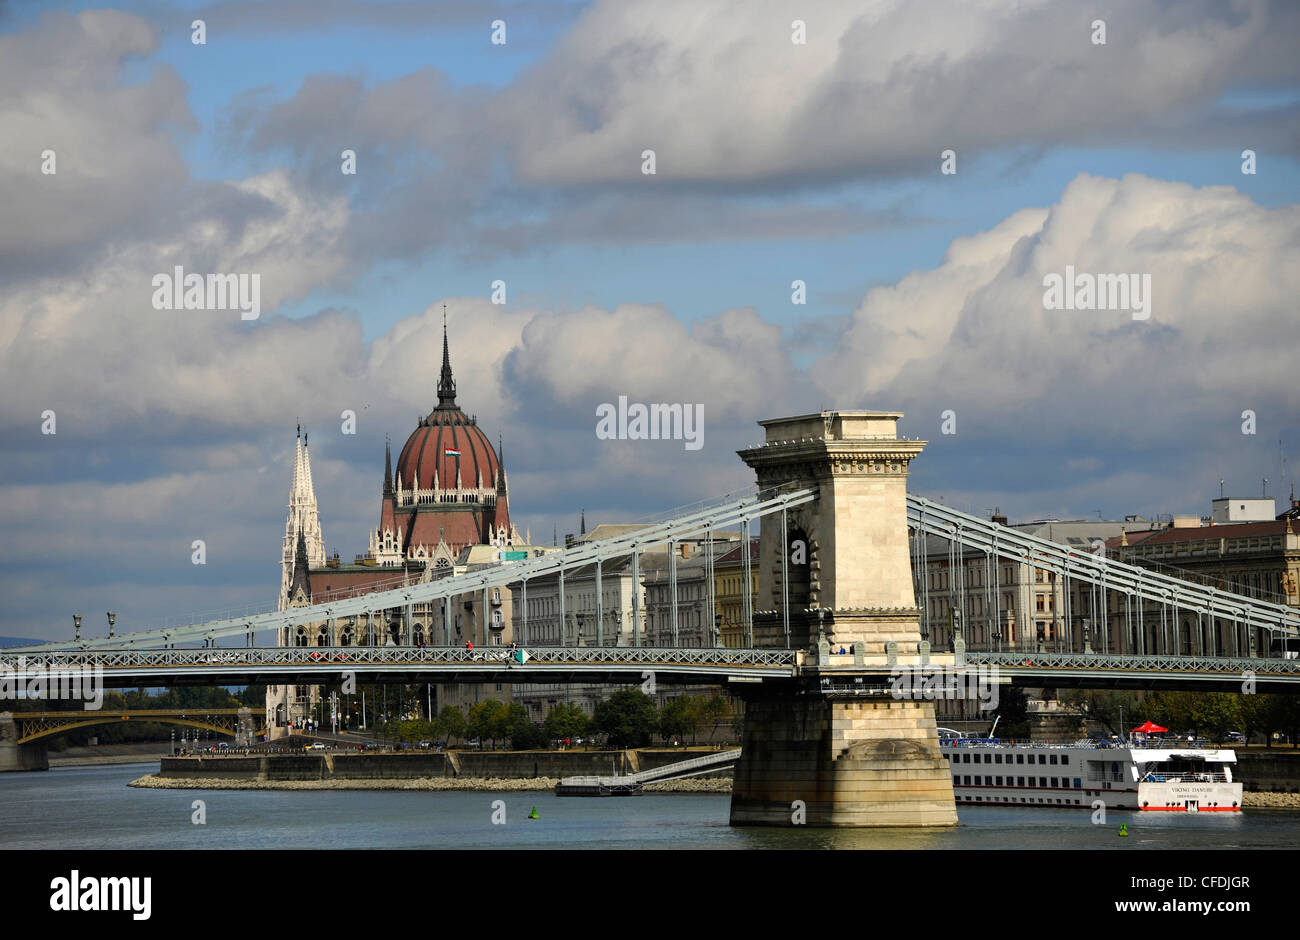 Danube river, House of Parliament and Chain Bridge under clouded sky, Budapest, Hungary, Europe Stock Photo